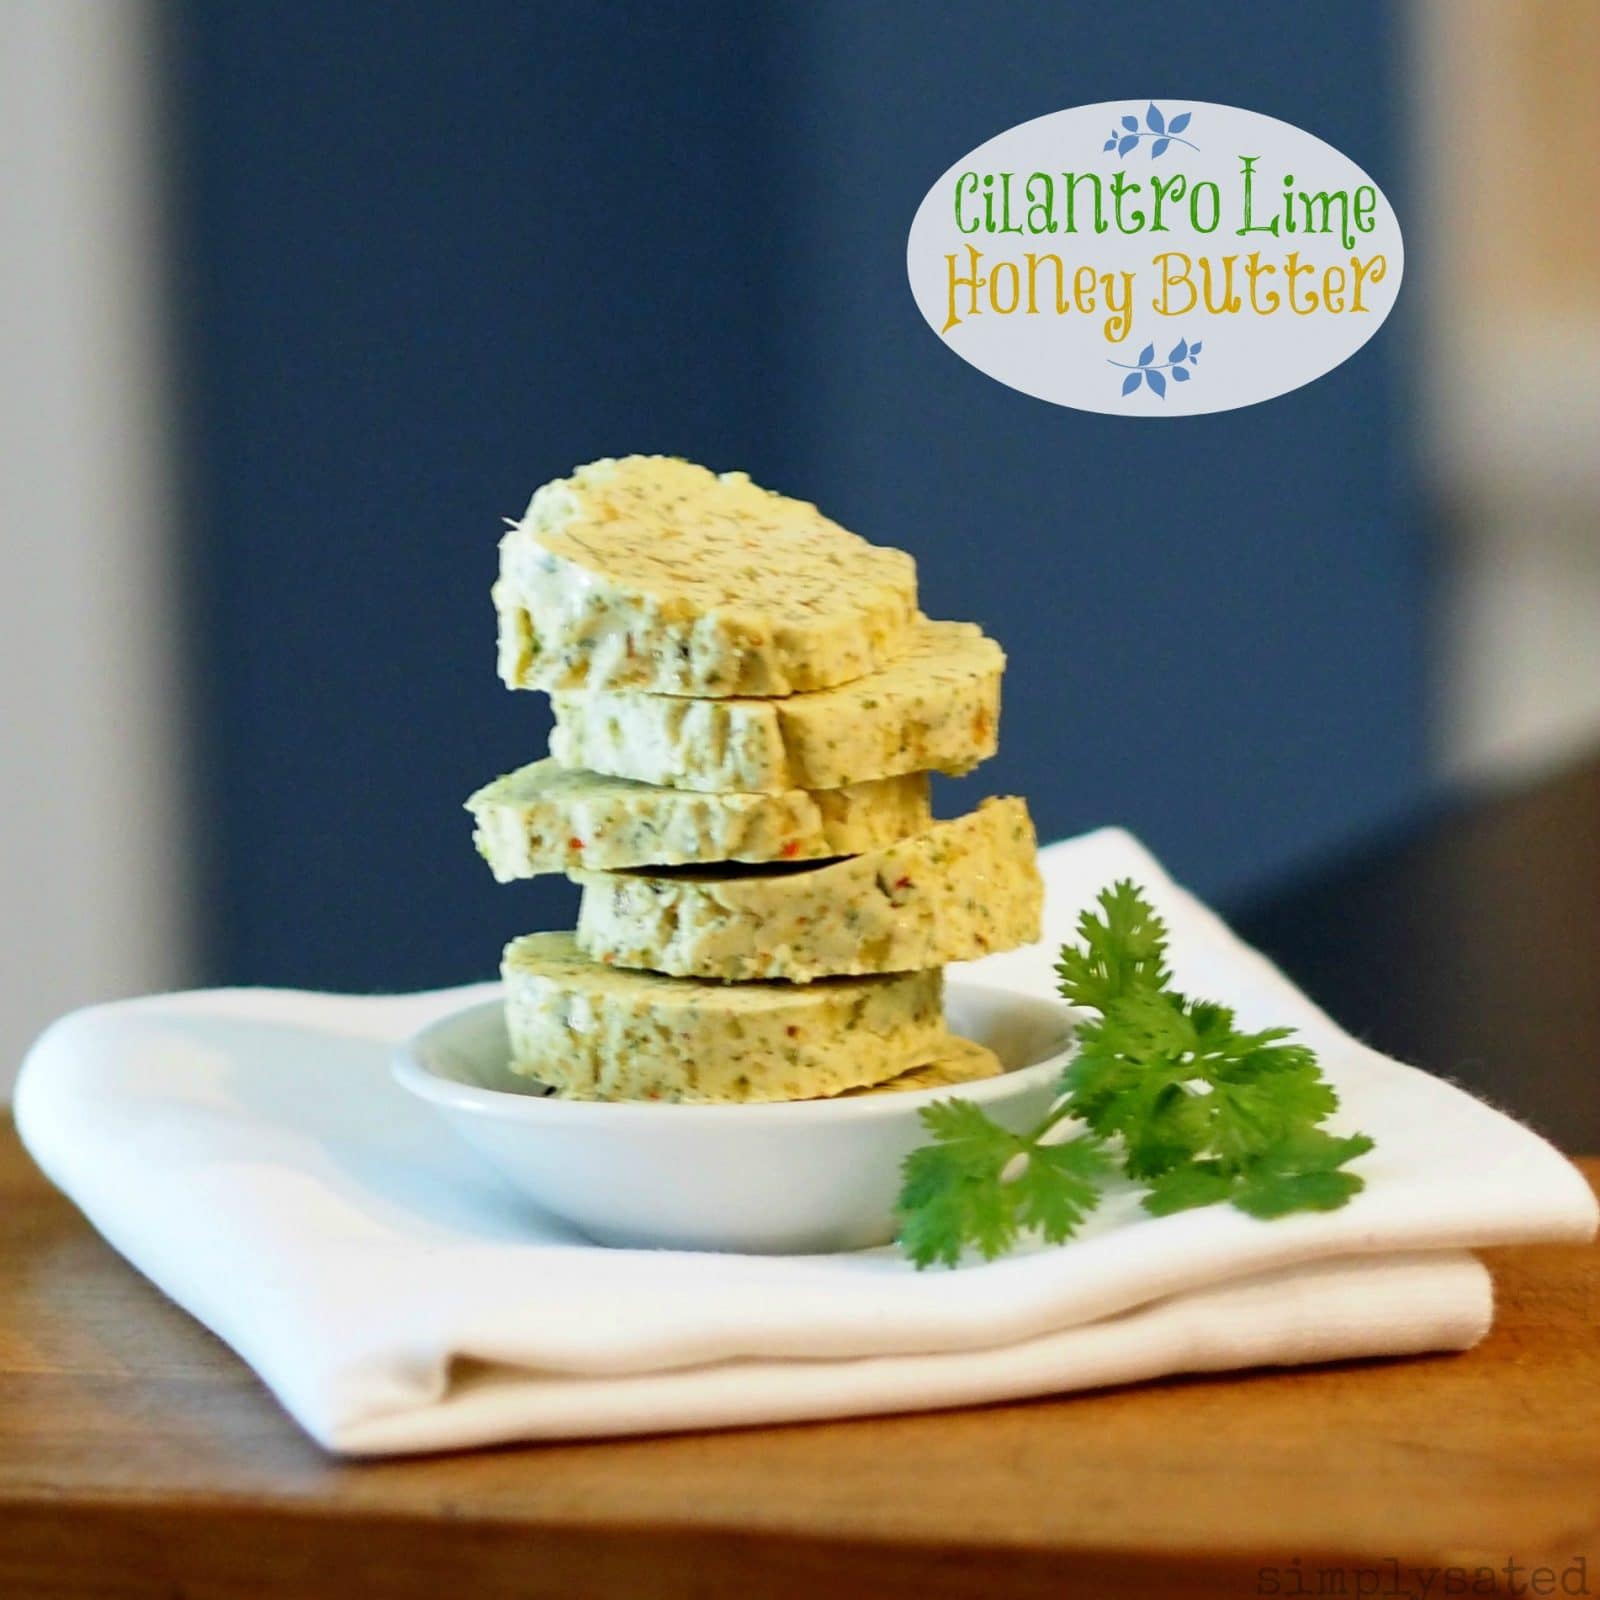 Cilantro Lime Honey Butter - a great way to add flavor to so many favorites; steak, chicken, pork and seafood just to name a few.